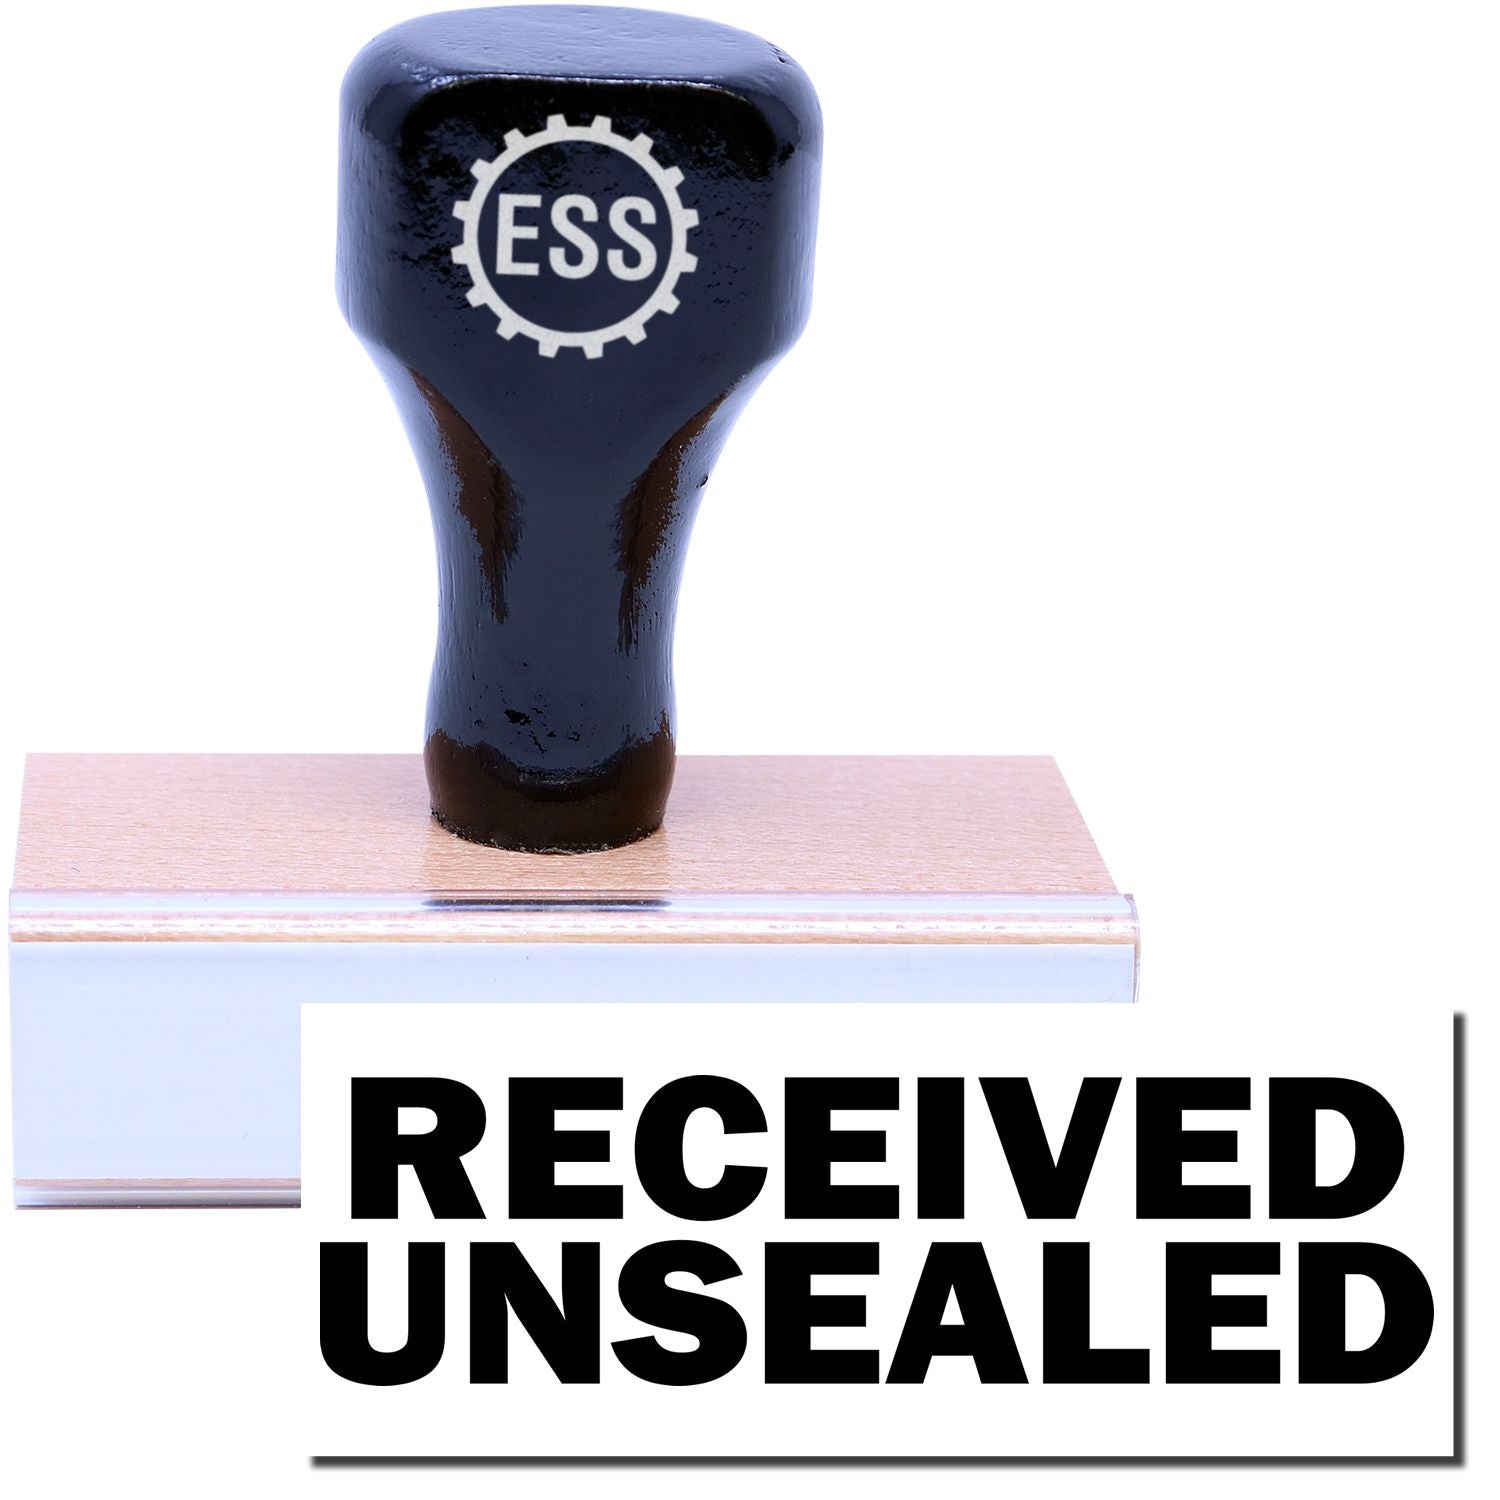 A stock office rubber stamp with a stamped image showing how the text "RECEIVED UNSEALED" is displayed after stamping.